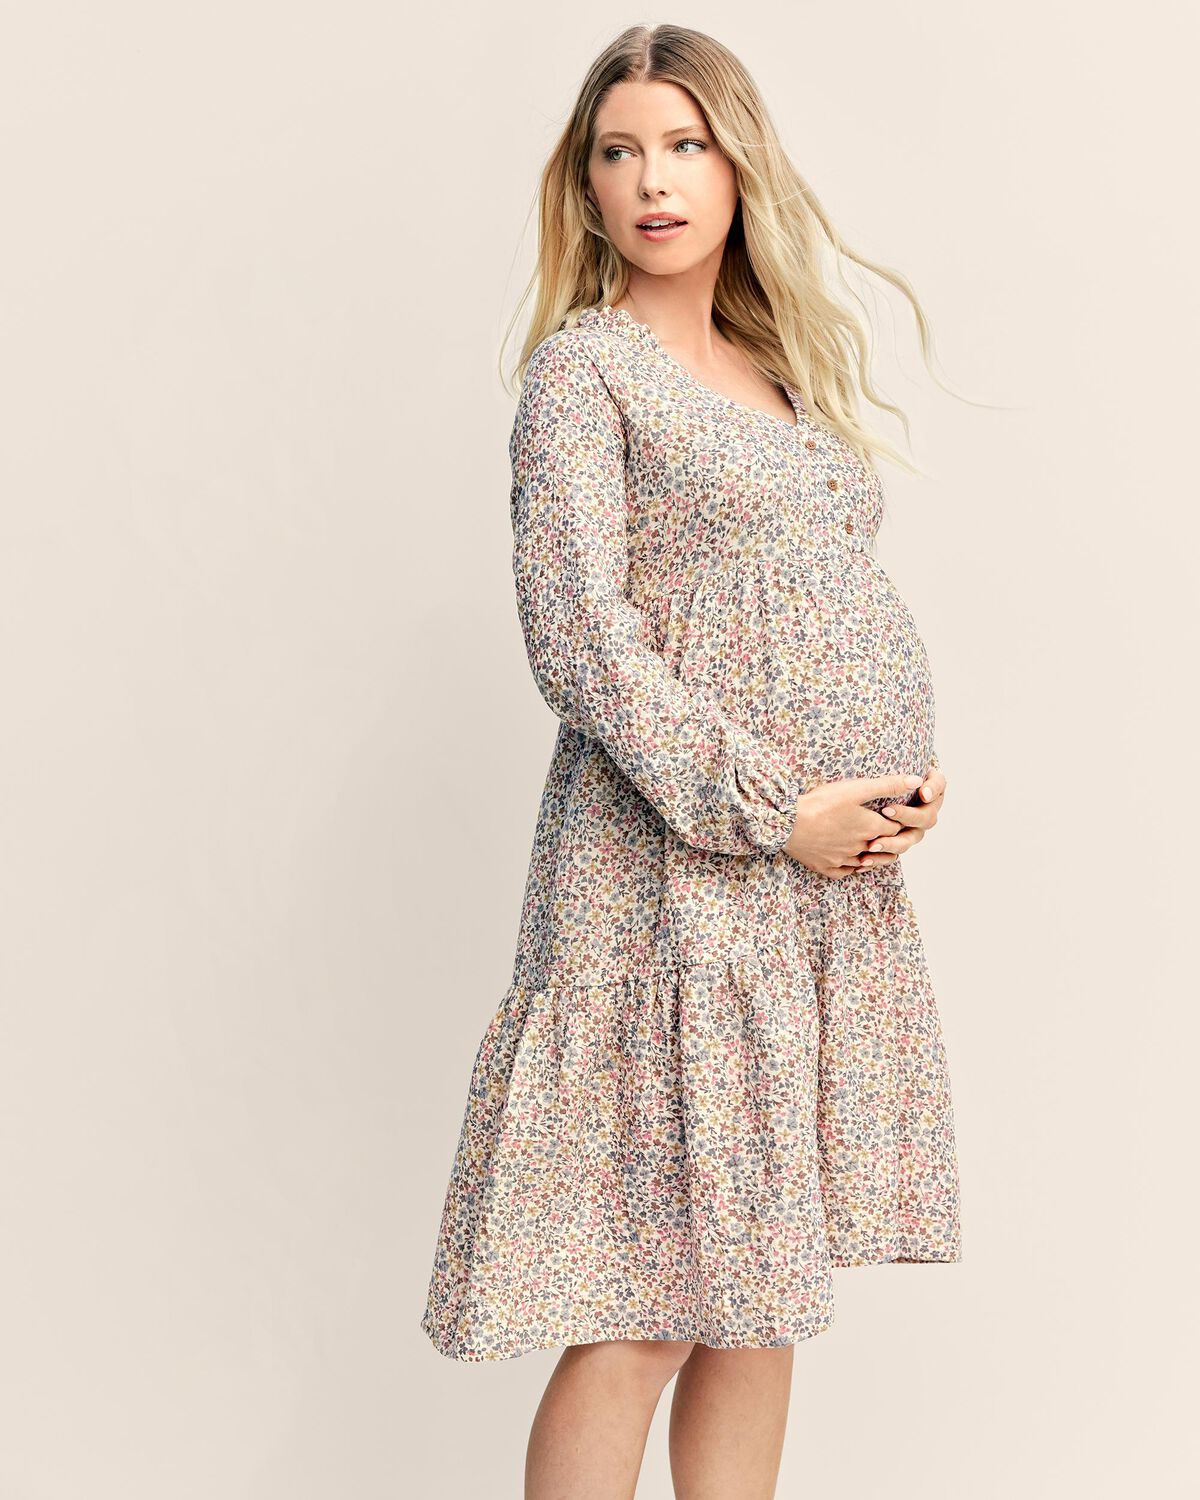 Adult Women's Maternity Button-Front Wildflower Dress